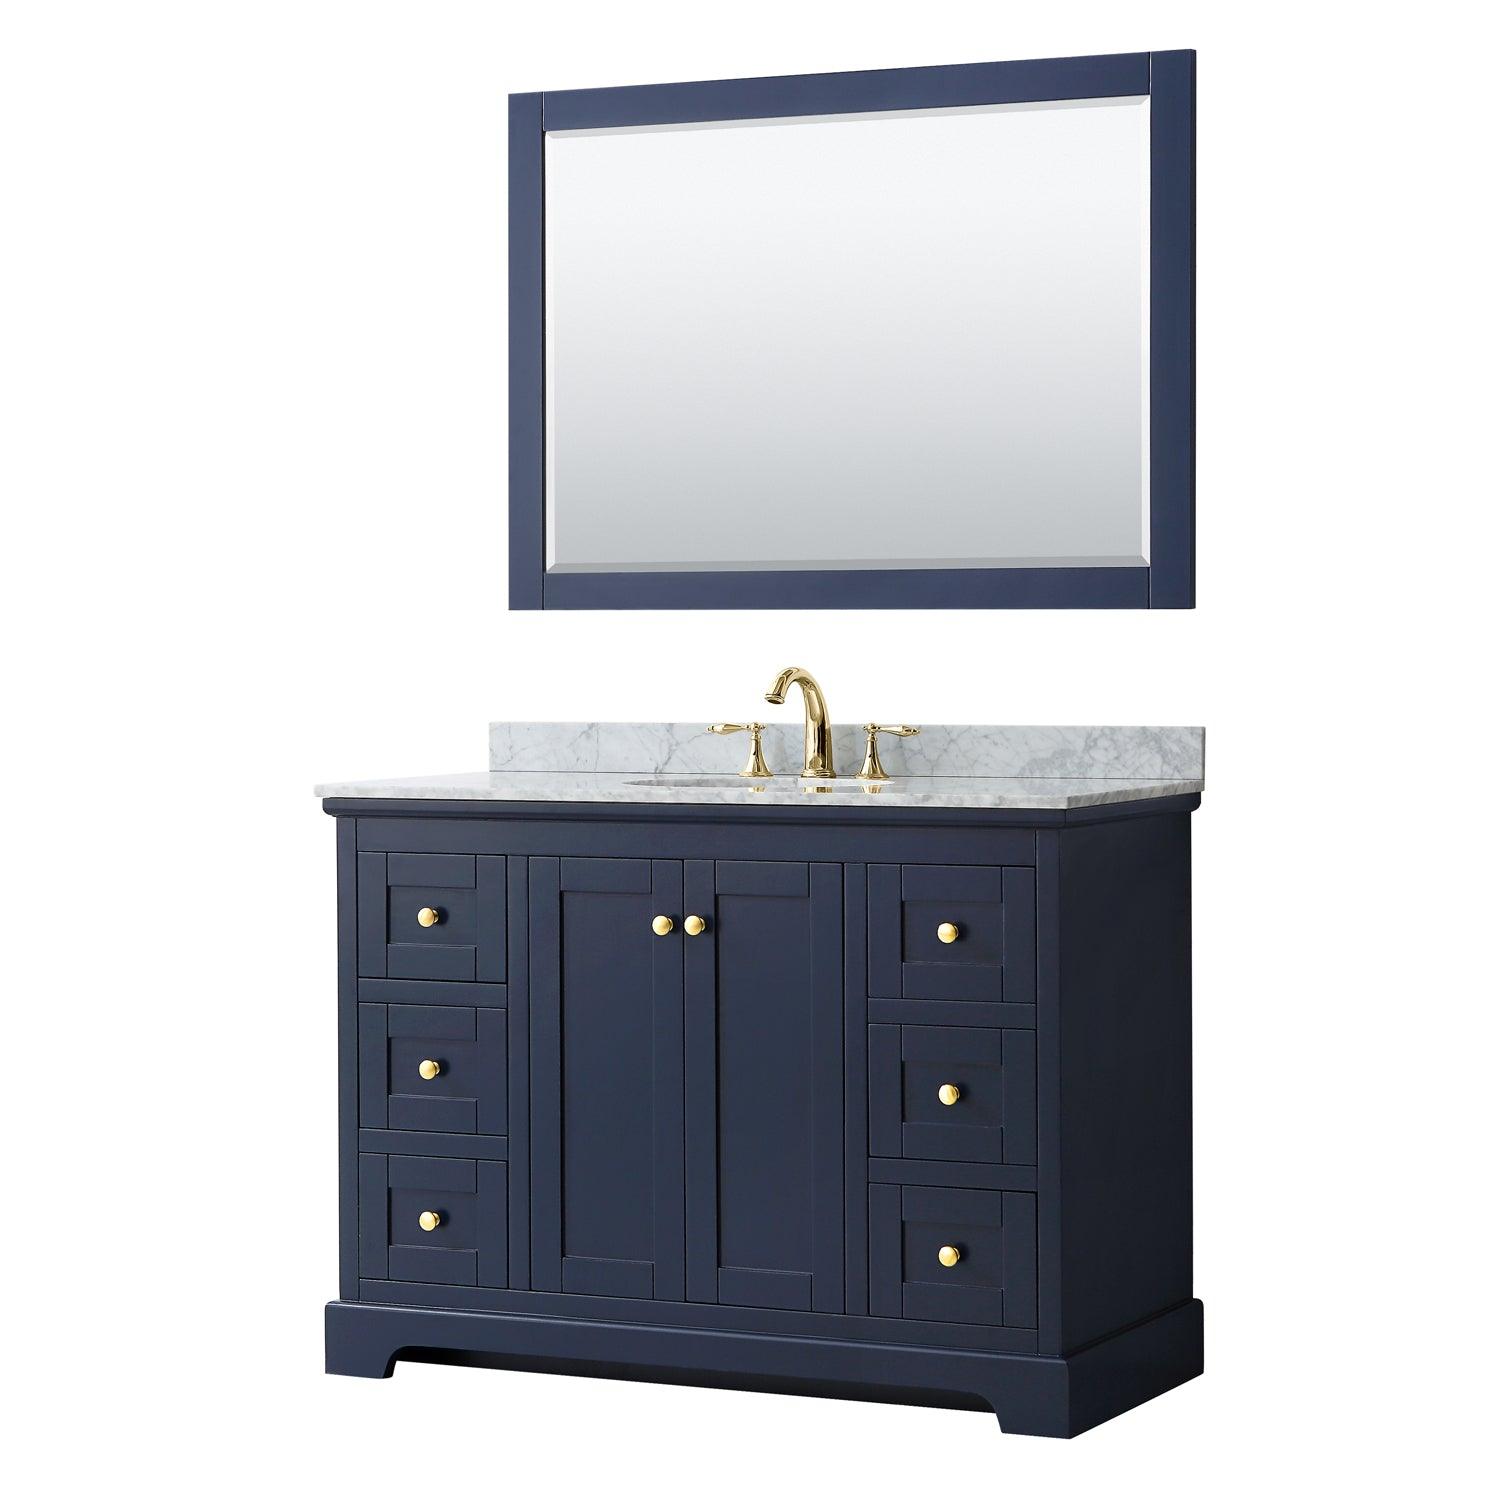 
  
  Wyndham Collection Avery Single Bathroom Vanity with White Carrara Marble Countertop, Undermount Oval Sink, Optional Mirror
  
